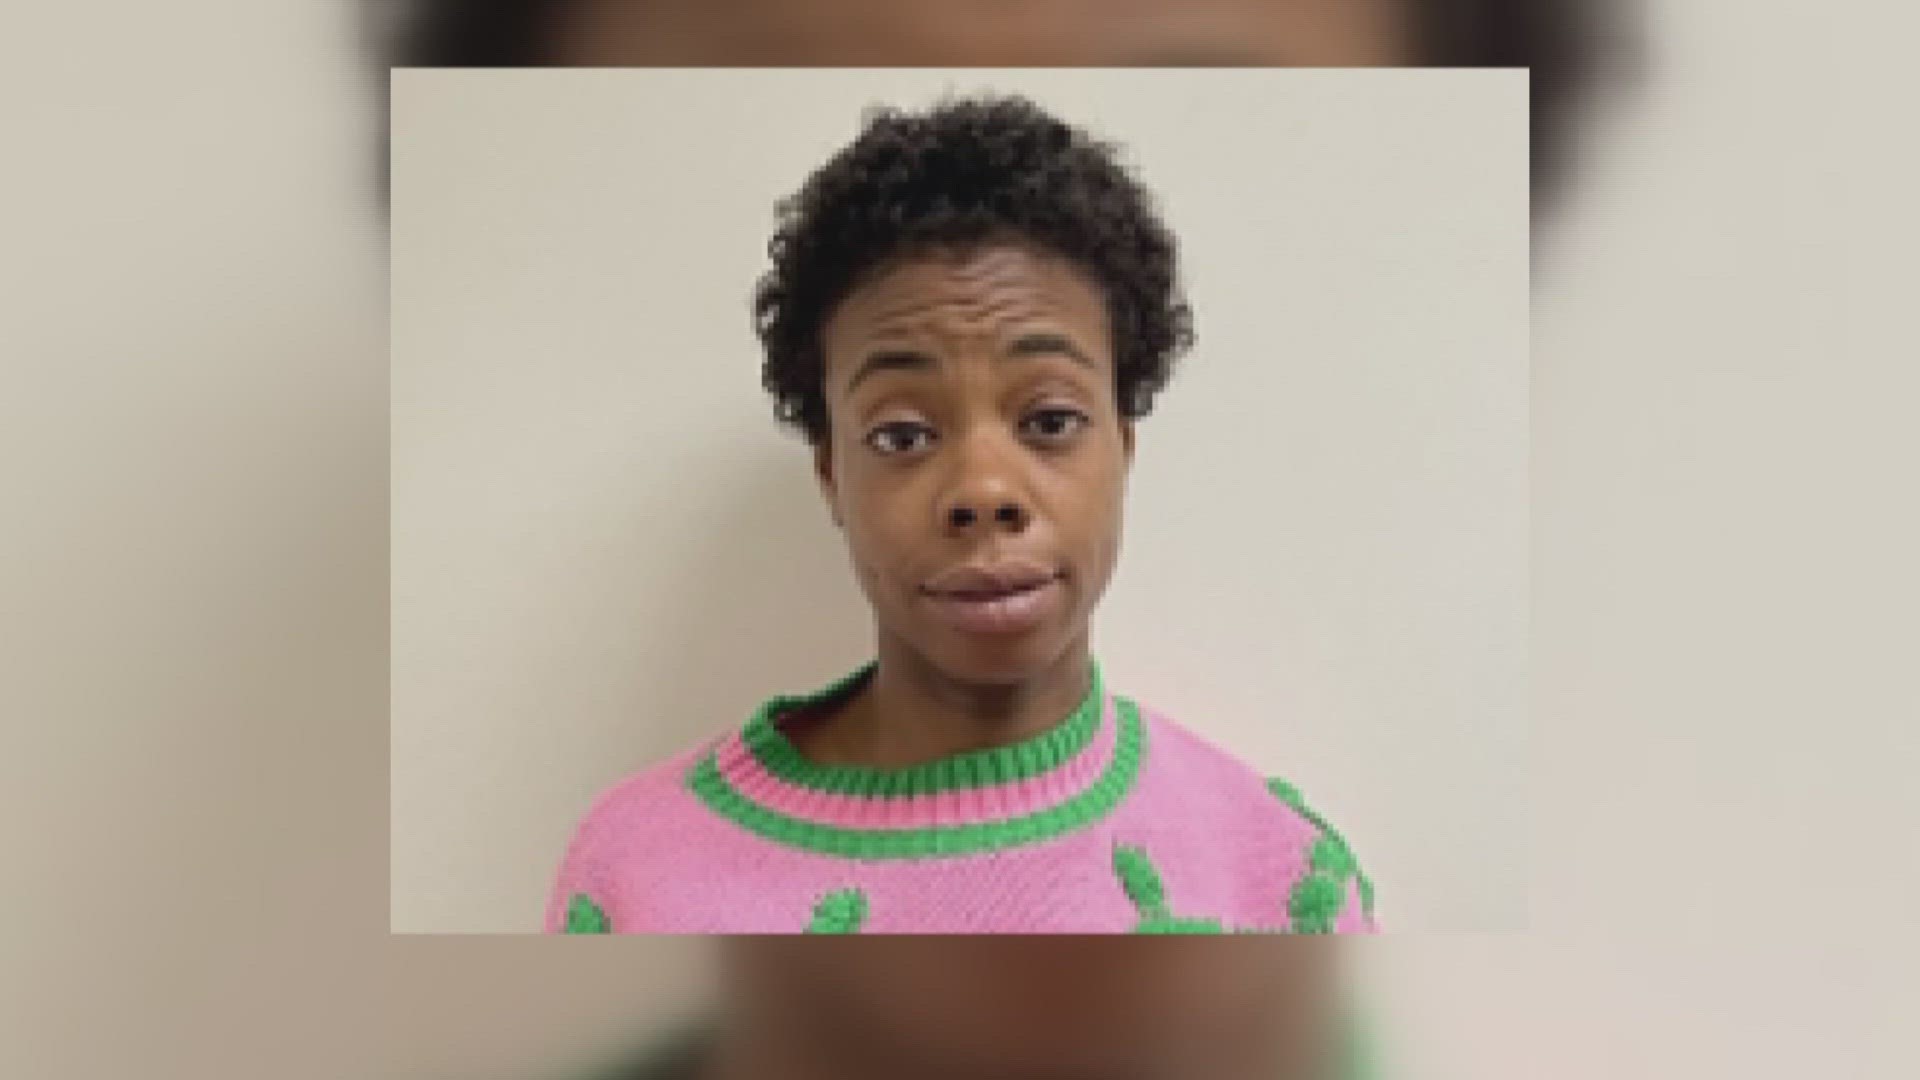 A 31-year-old Baltimore woman appeared in front of a Prince George's County judge Monday afternoon, after being charged in connection to a violent crime spree.